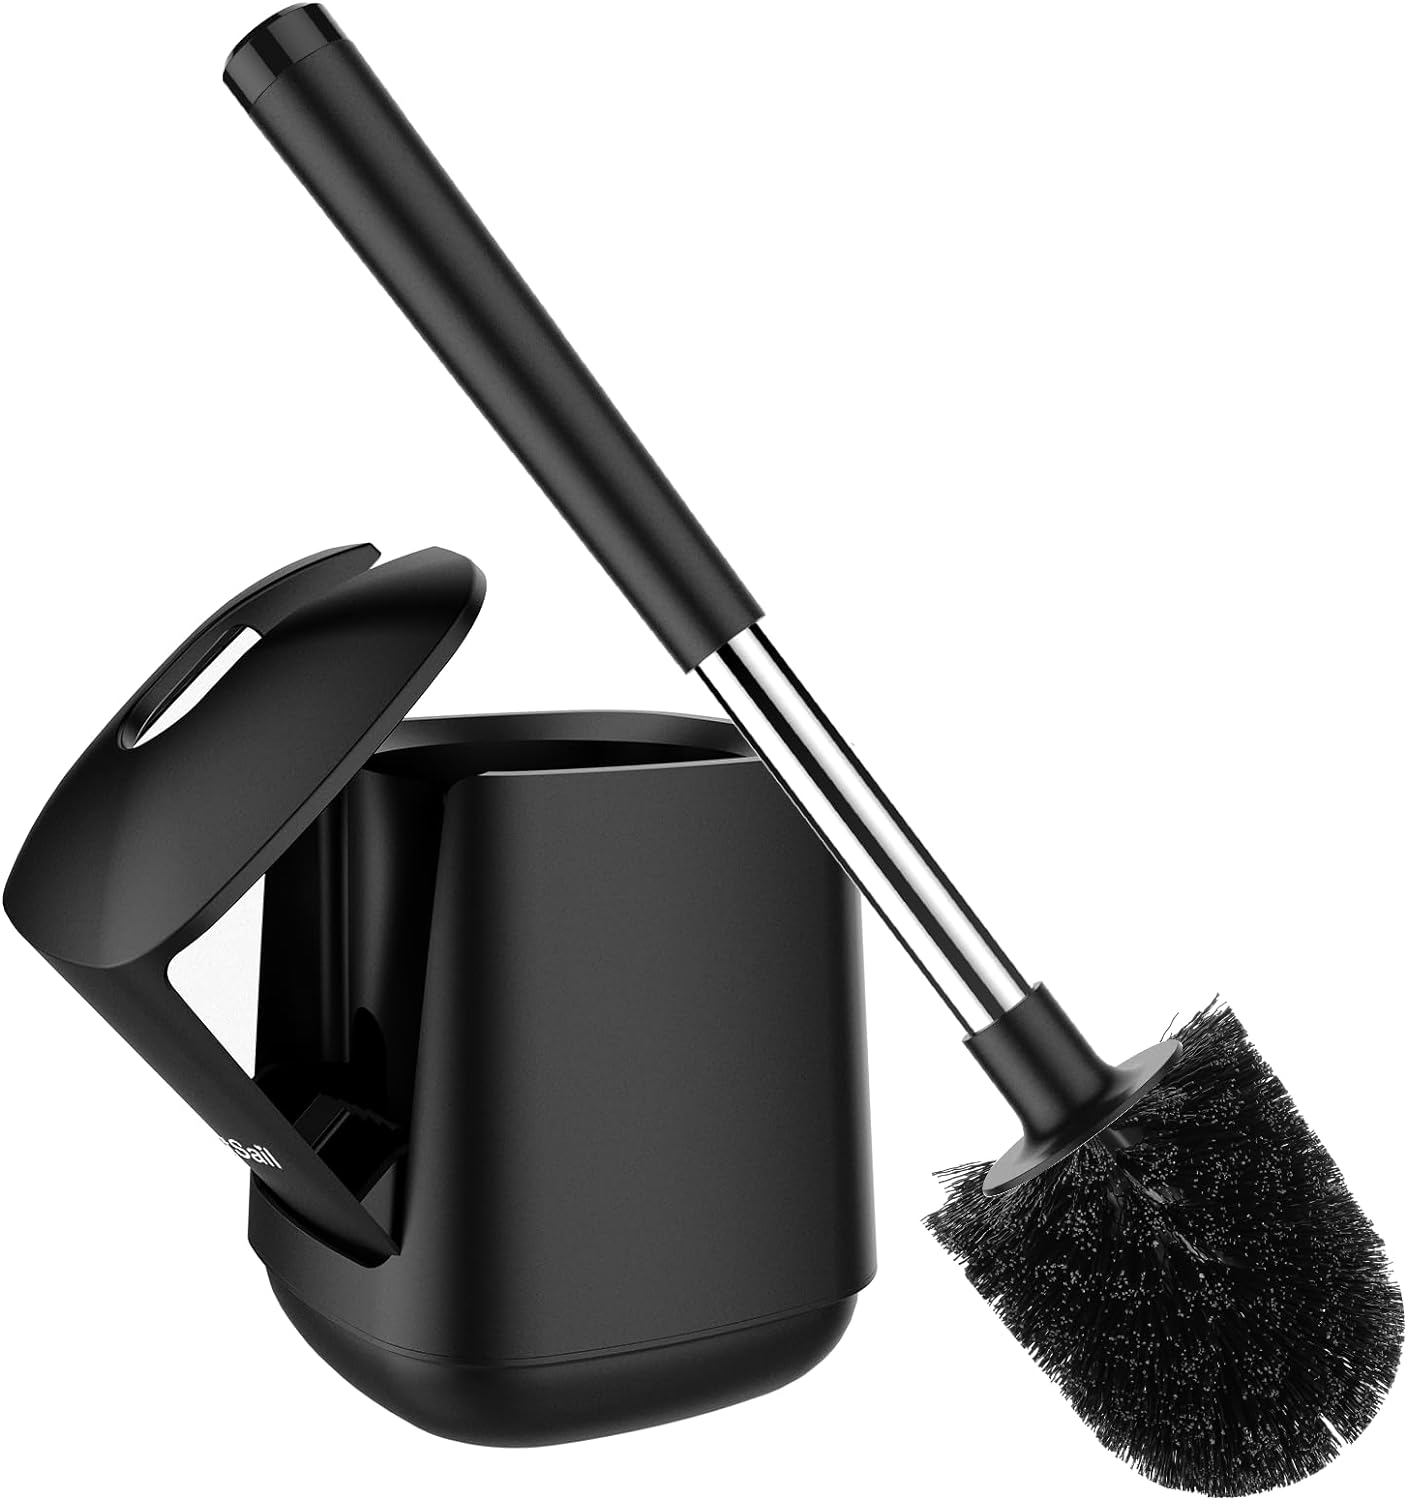 SetSail Toilet Bowl Brush and Holder Automatic Toilet Brushes for Bathroom with Holder Ventilated Toilet Cleaner Brush for Toilet Scrubber Cleaning - Black